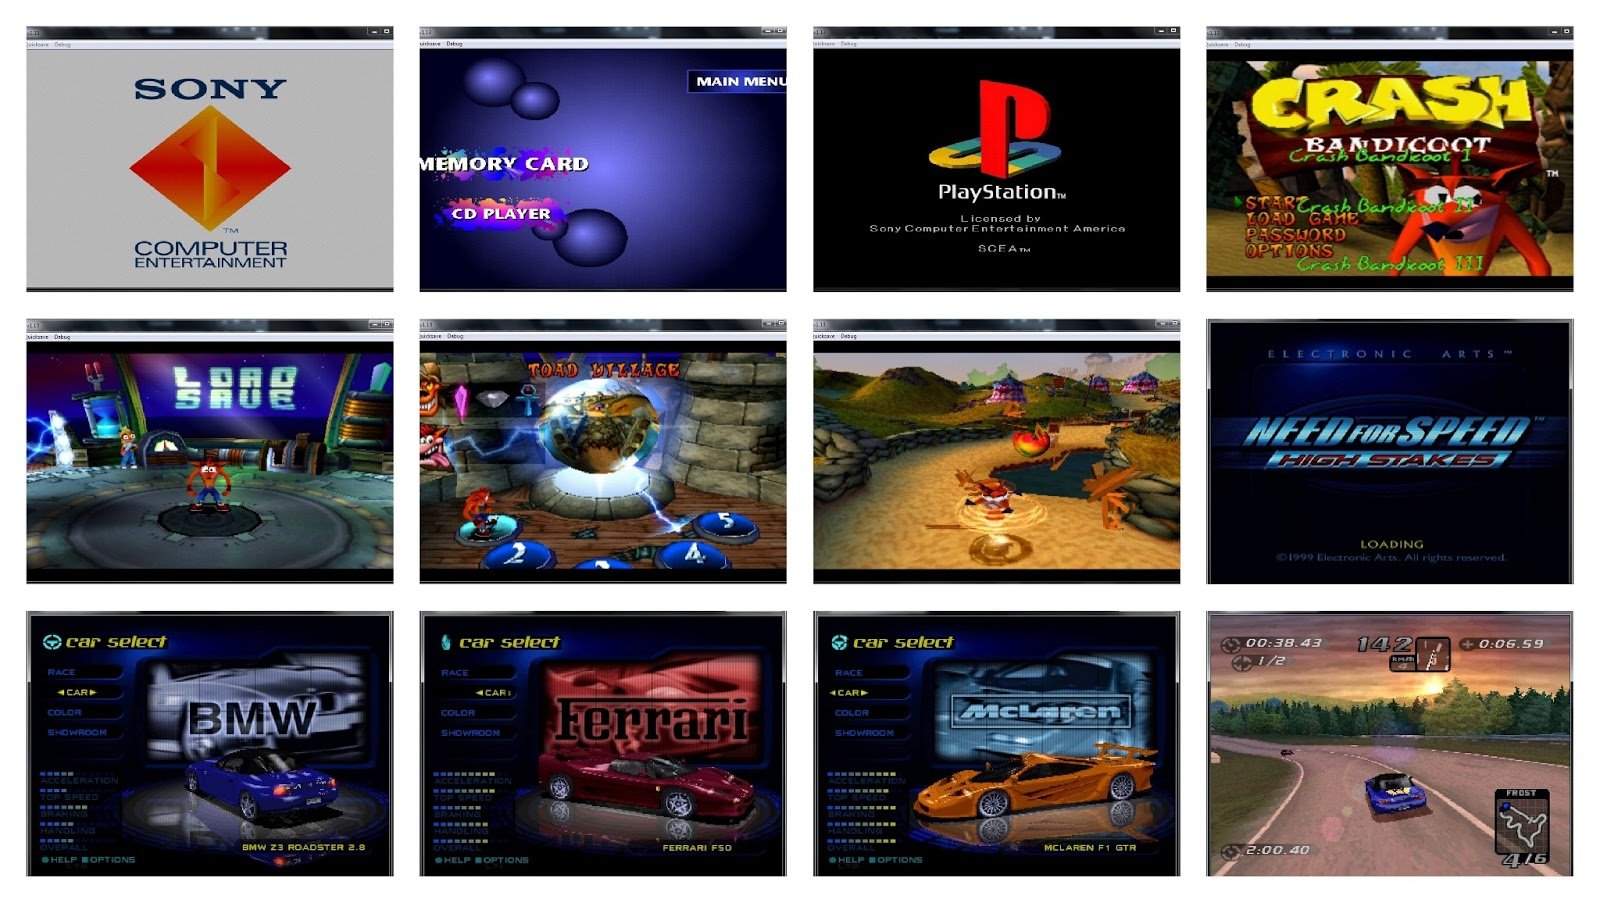 SUNGamesworld: HOW TO PLAY PS1 GAMES ON PC